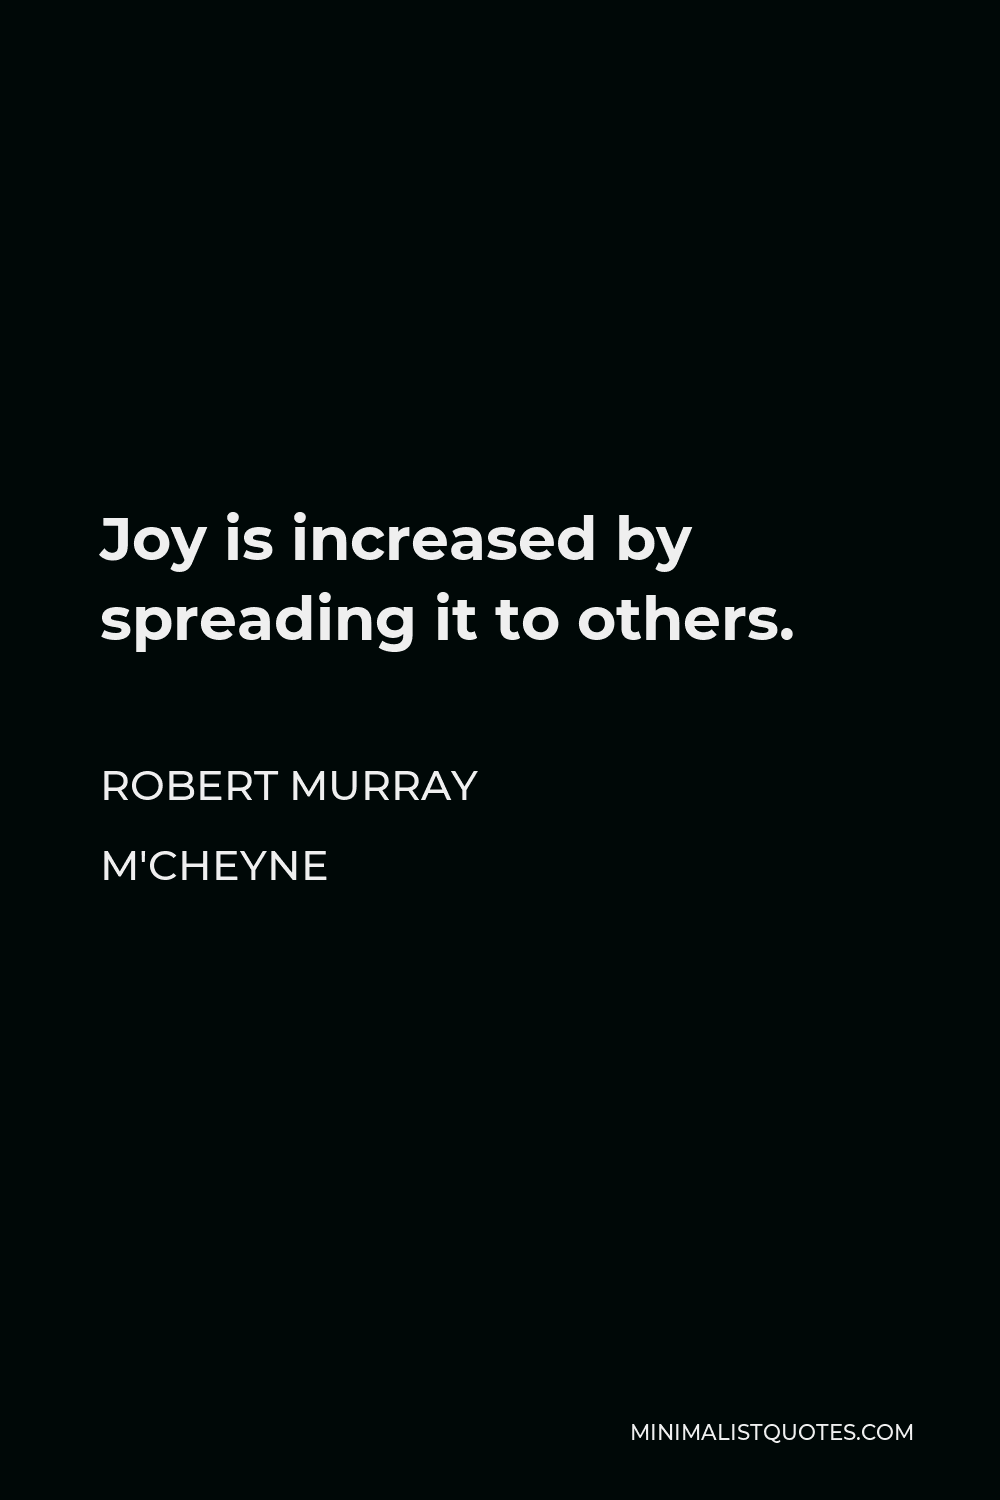 Robert Murray M'Cheyne Quote - Joy is increased by spreading it to others.